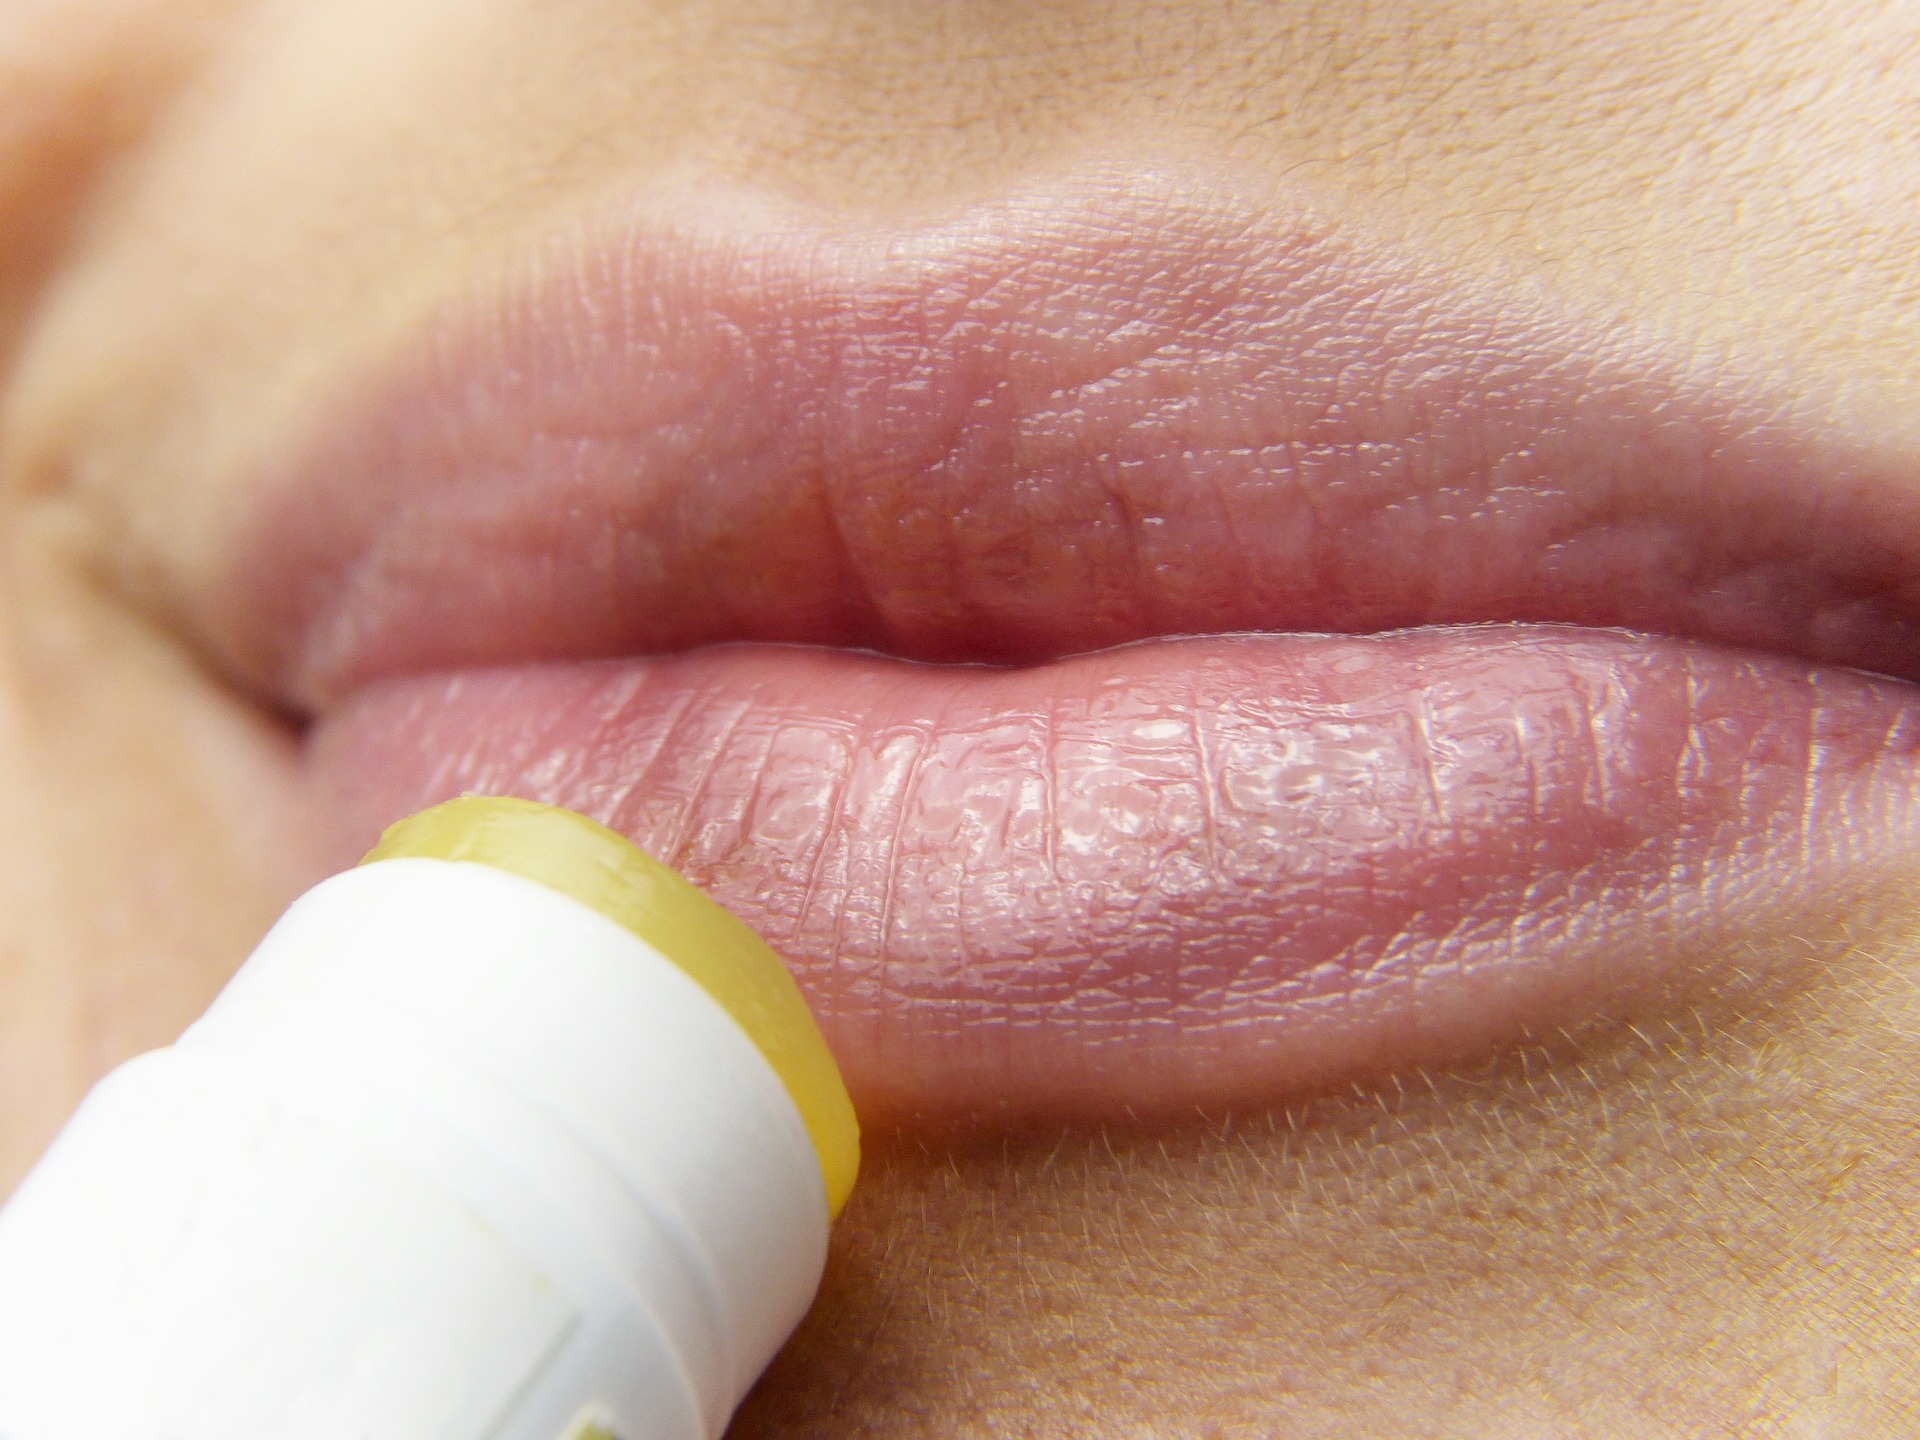 HPV White Spots on Lips, Symptoms, Causes, and Treatment